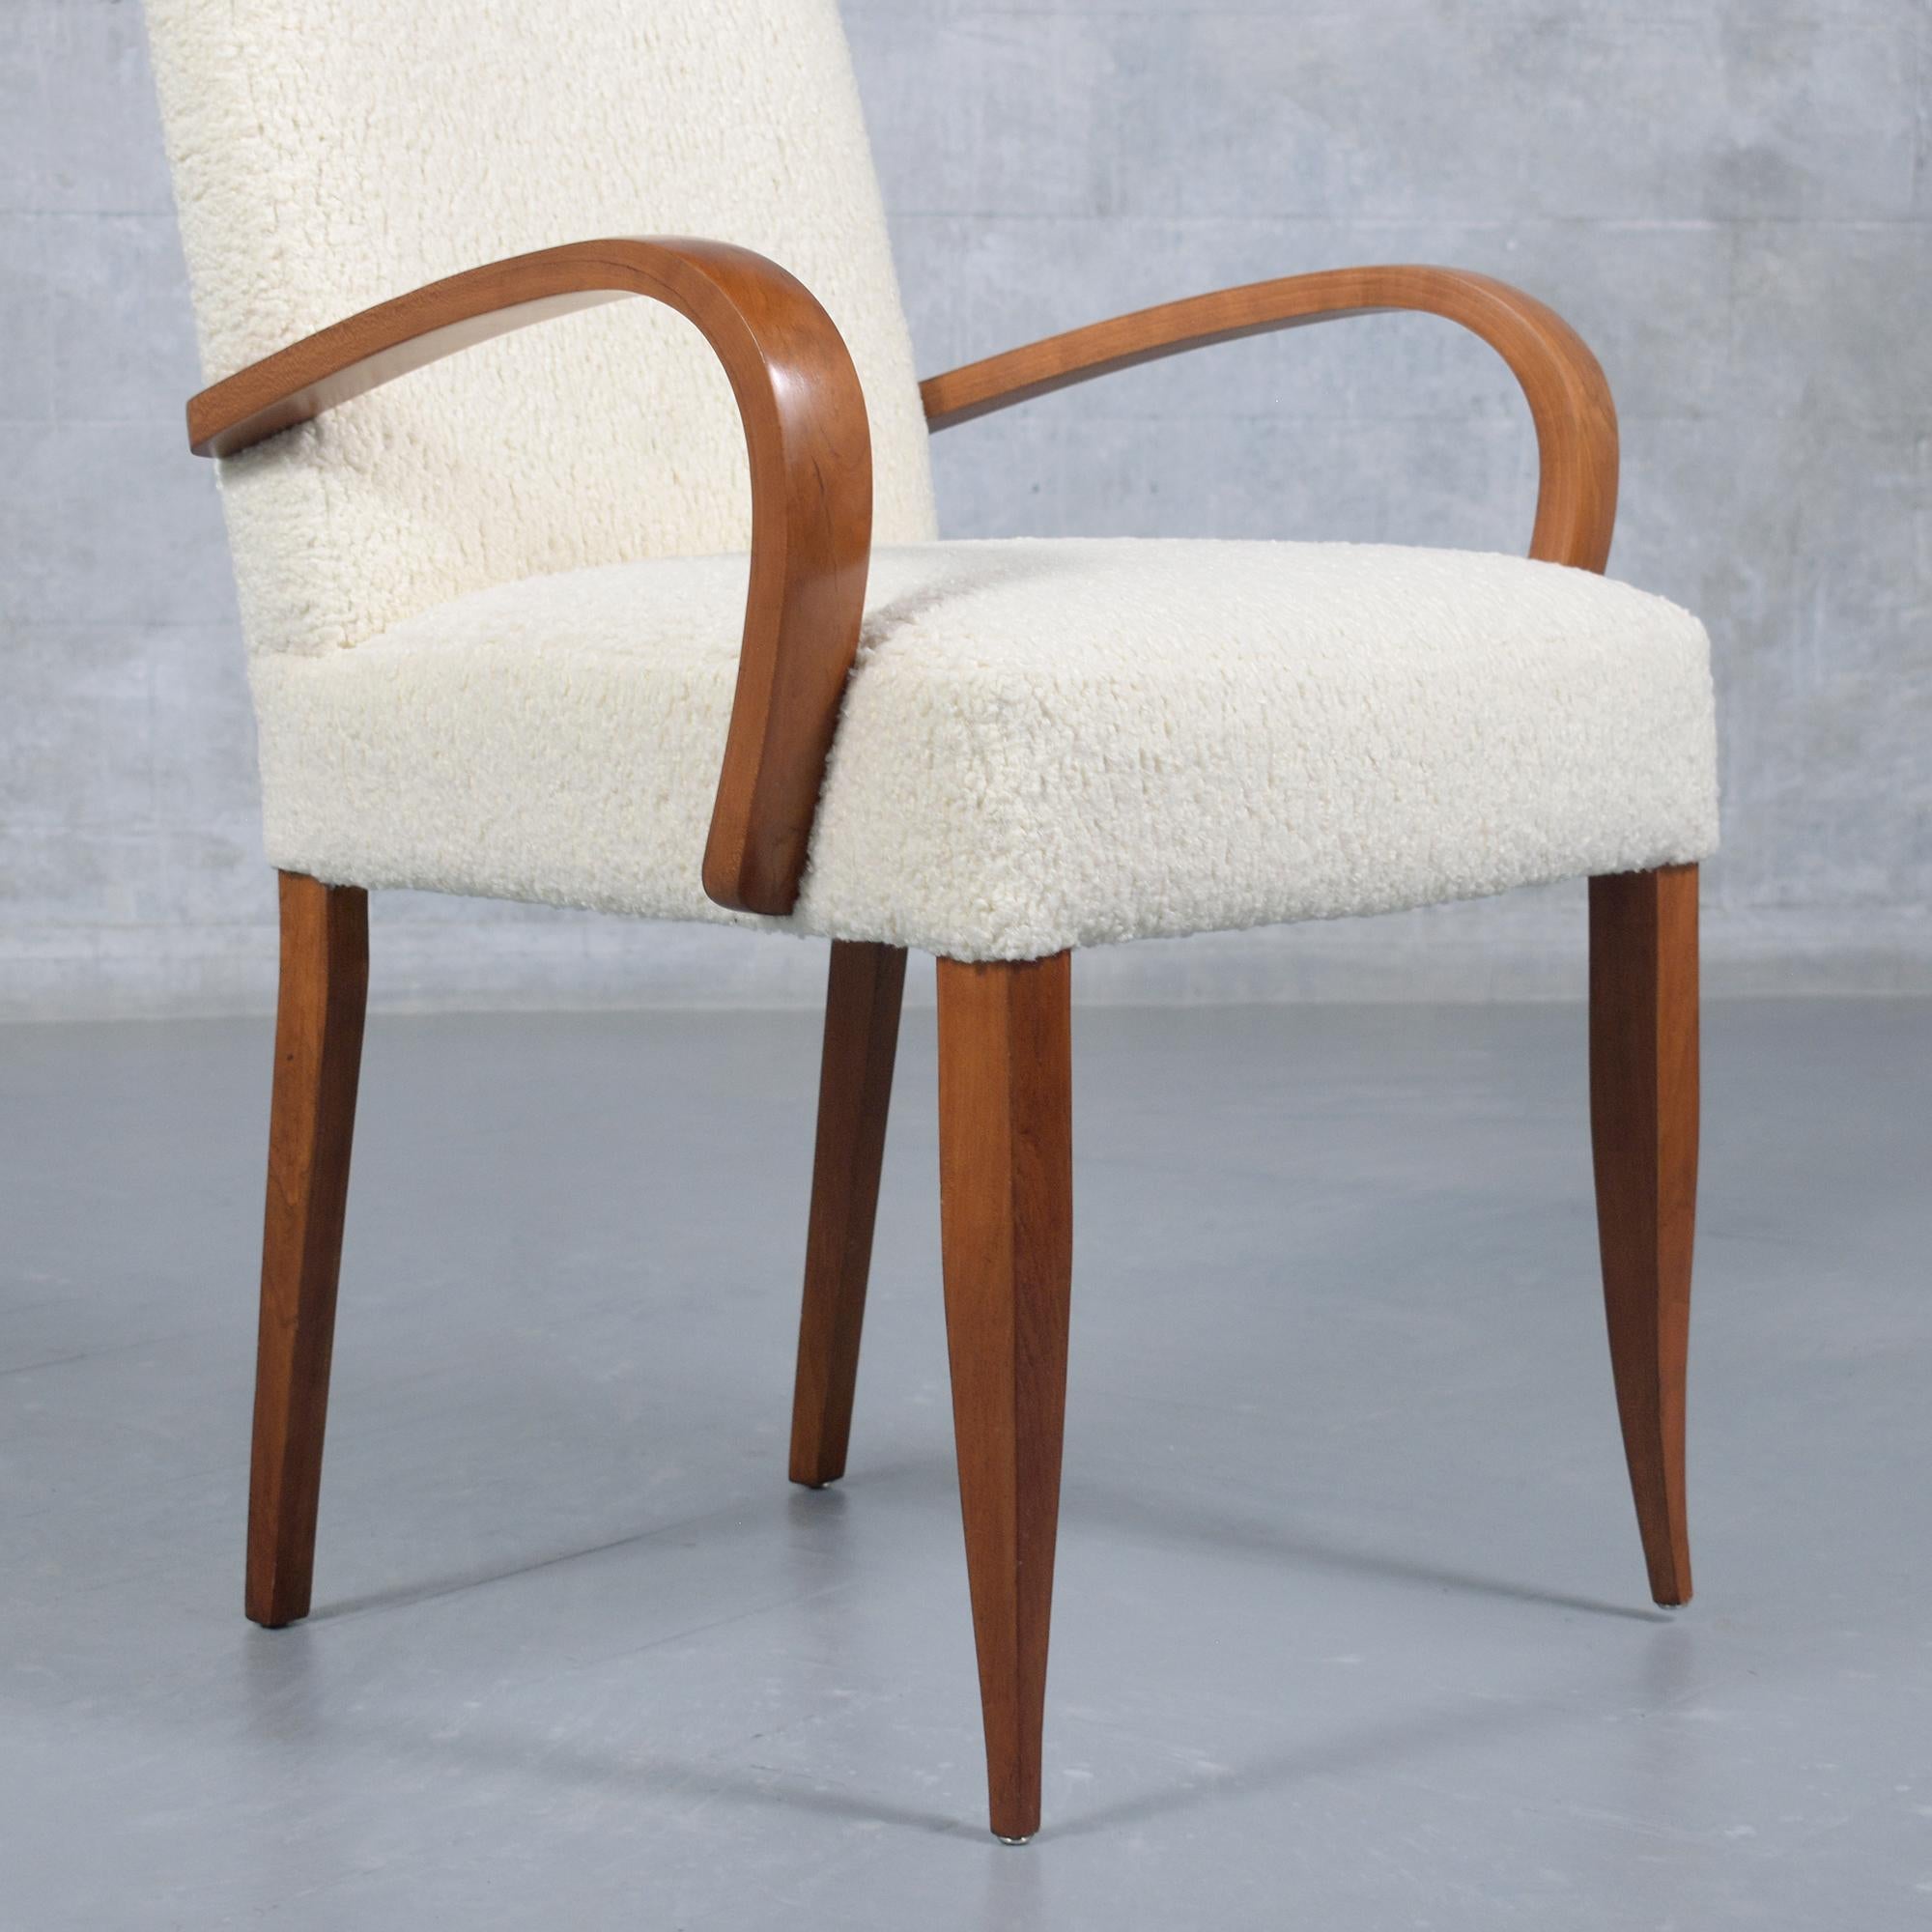 Mid-20th Century Pair of Mid-Century Modern Walnut Armchairs: Refined Elegance & Comfort For Sale